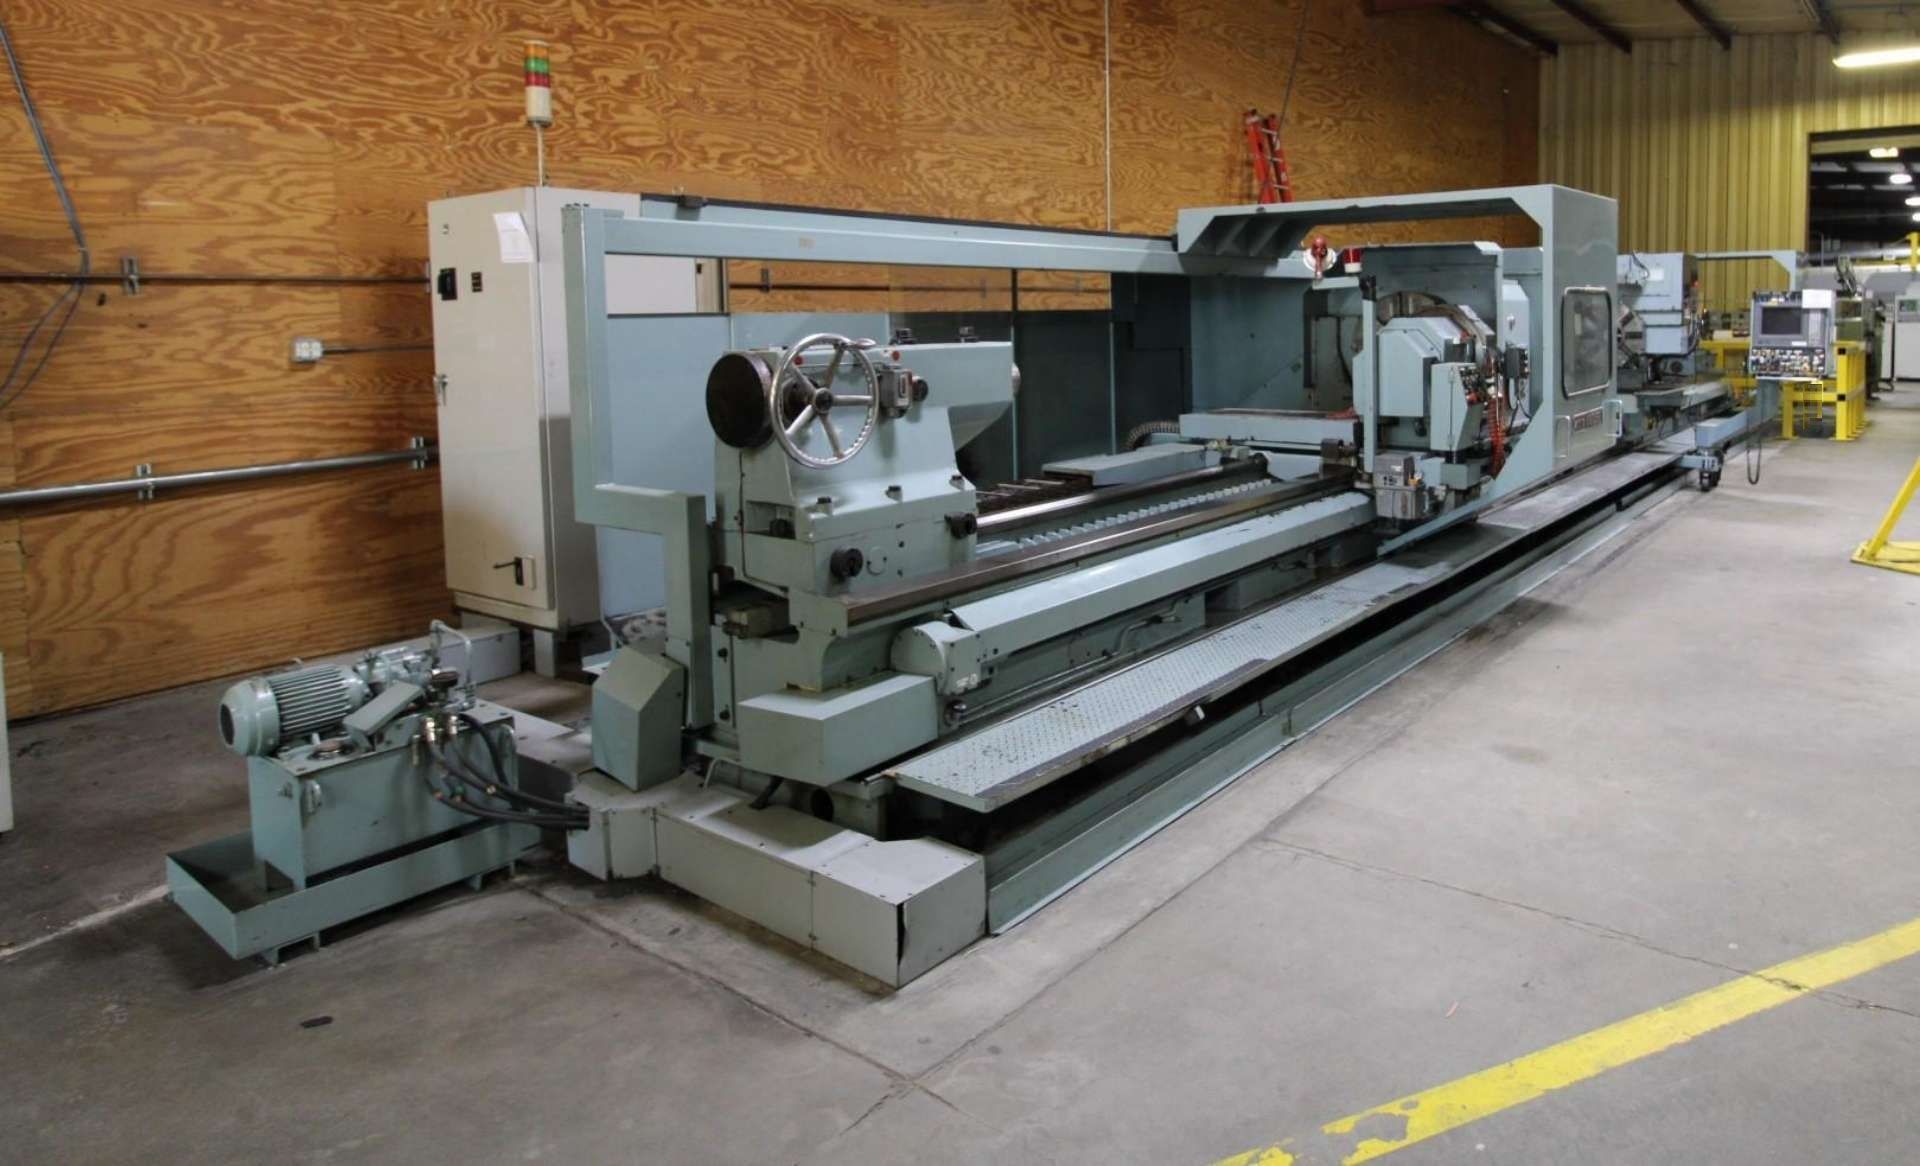 Ikegai ANC-56 CNC Hollow Spindle Center Drive Lathe - Image 3 of 20